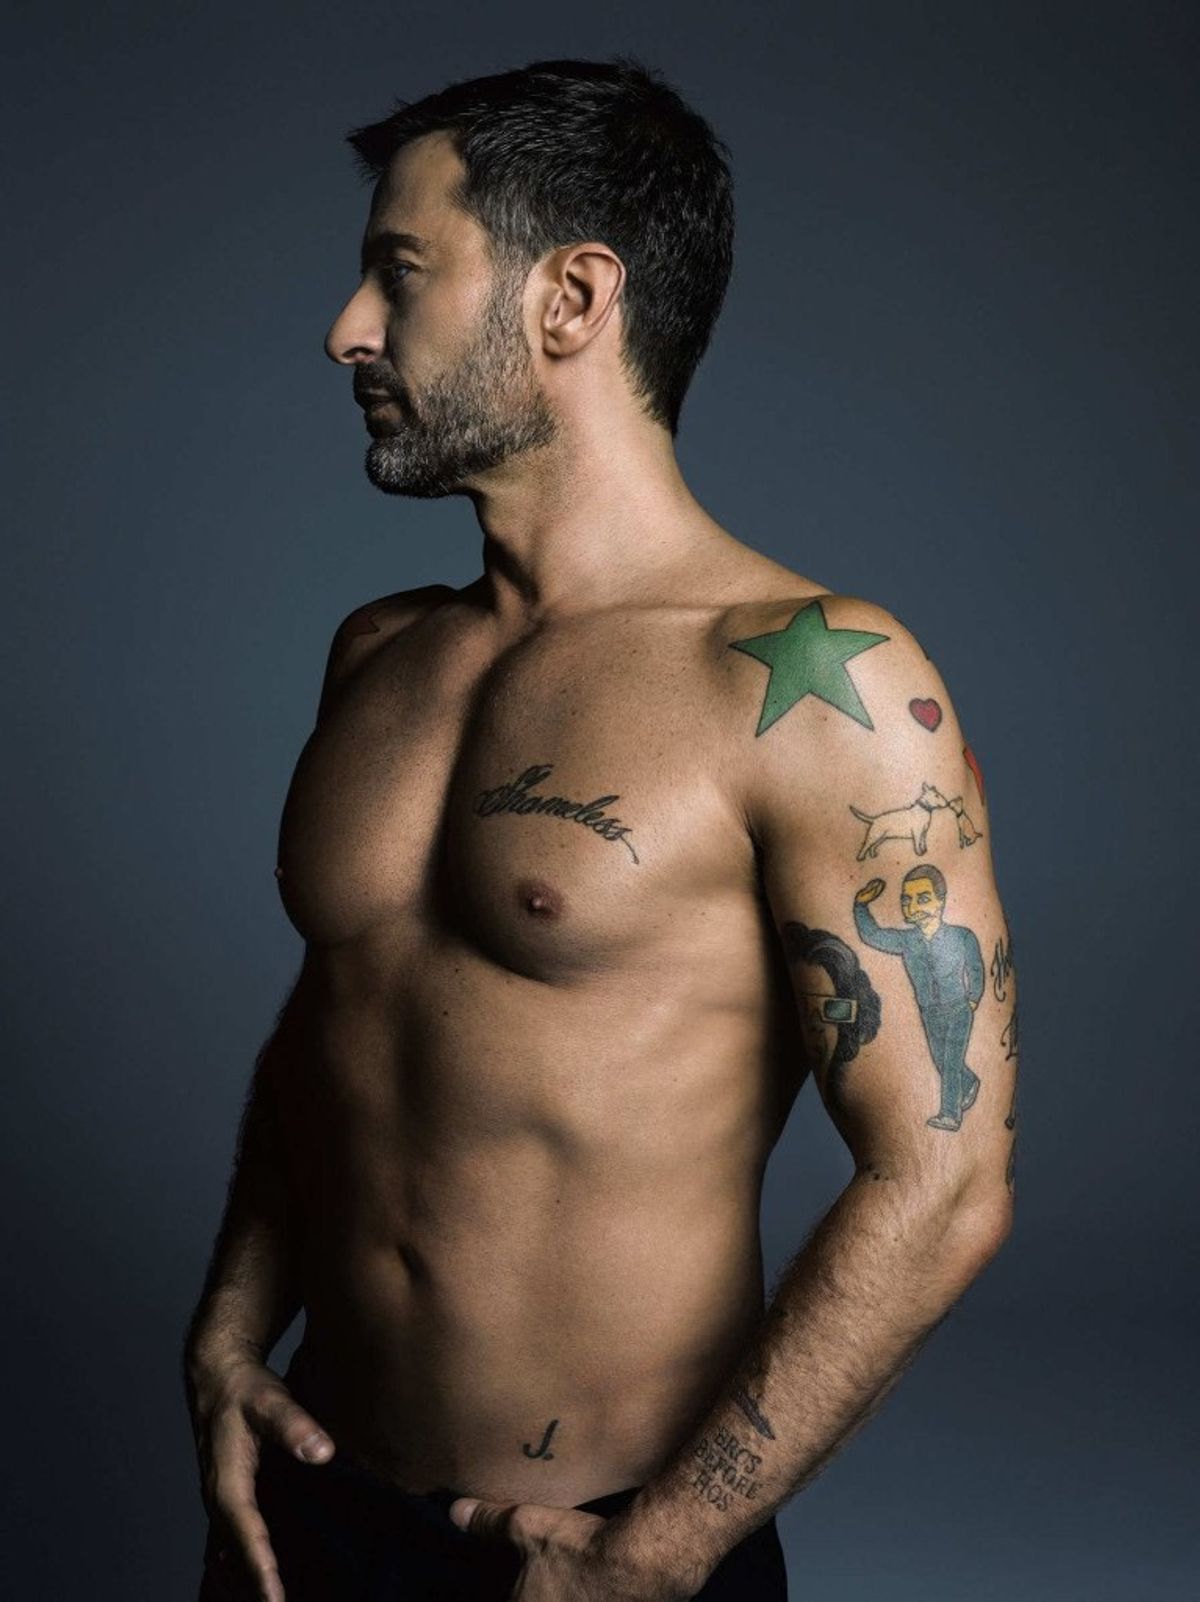 The Mystery Behind Marc Jacobs And His Tattoos